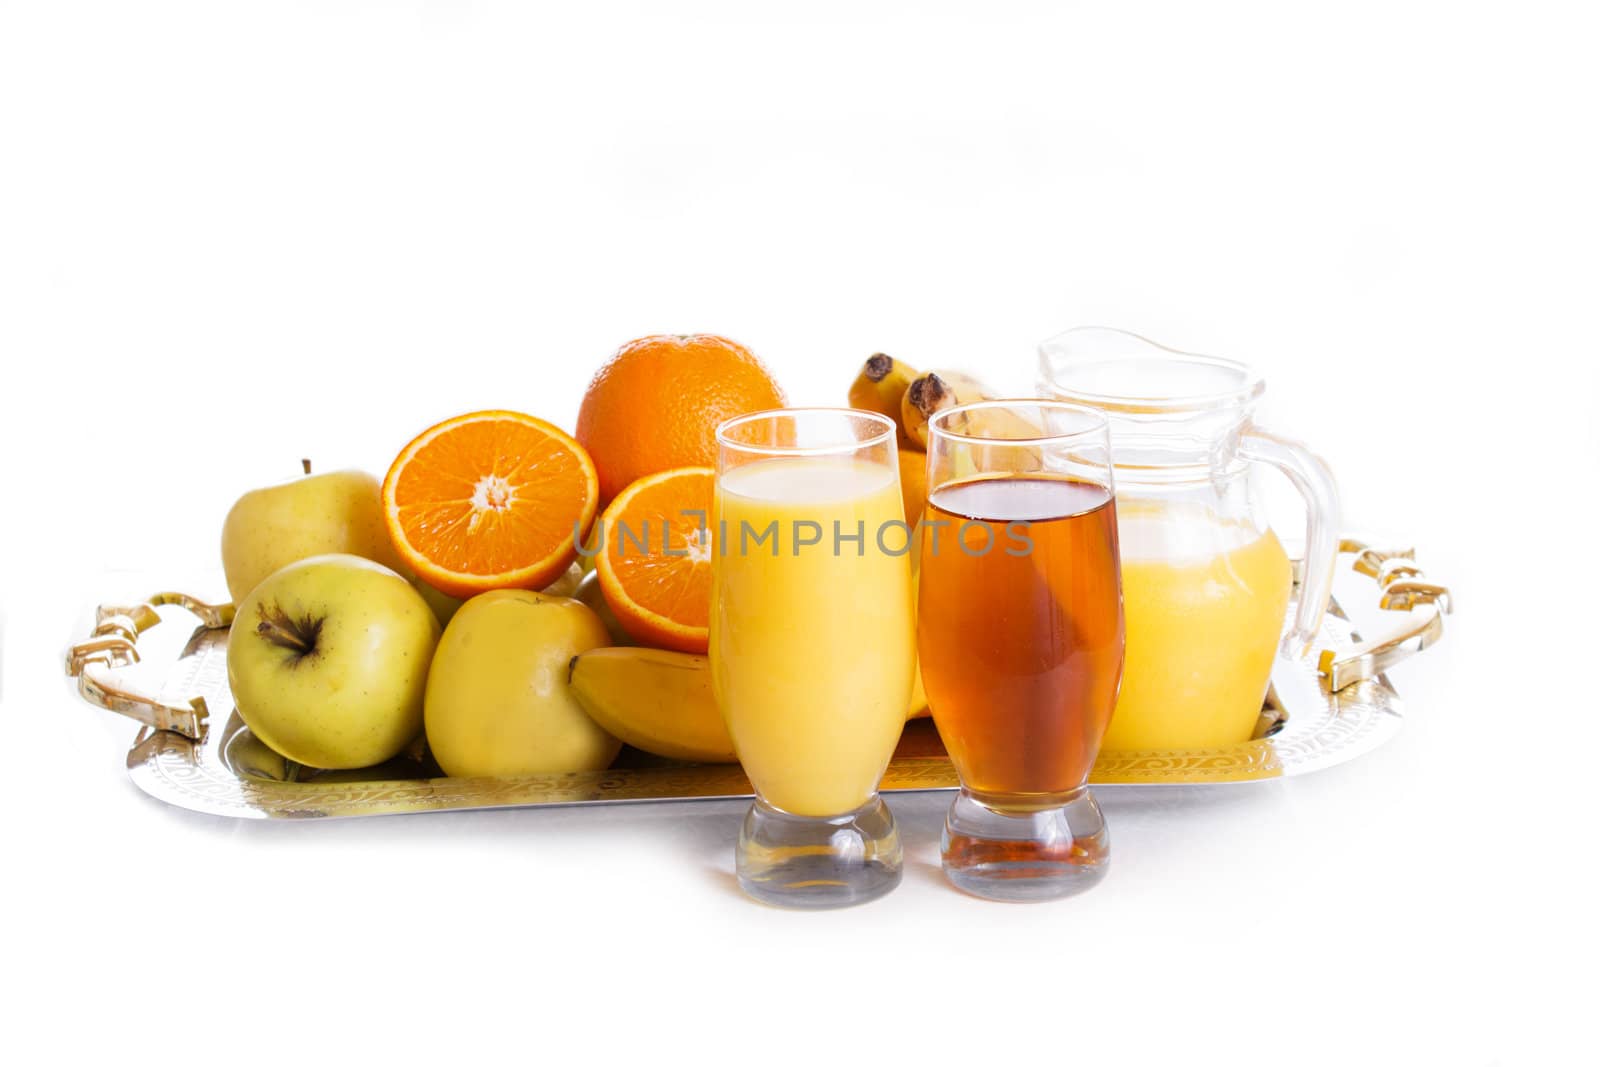 Apple and orange fruits with juice by Angel_a